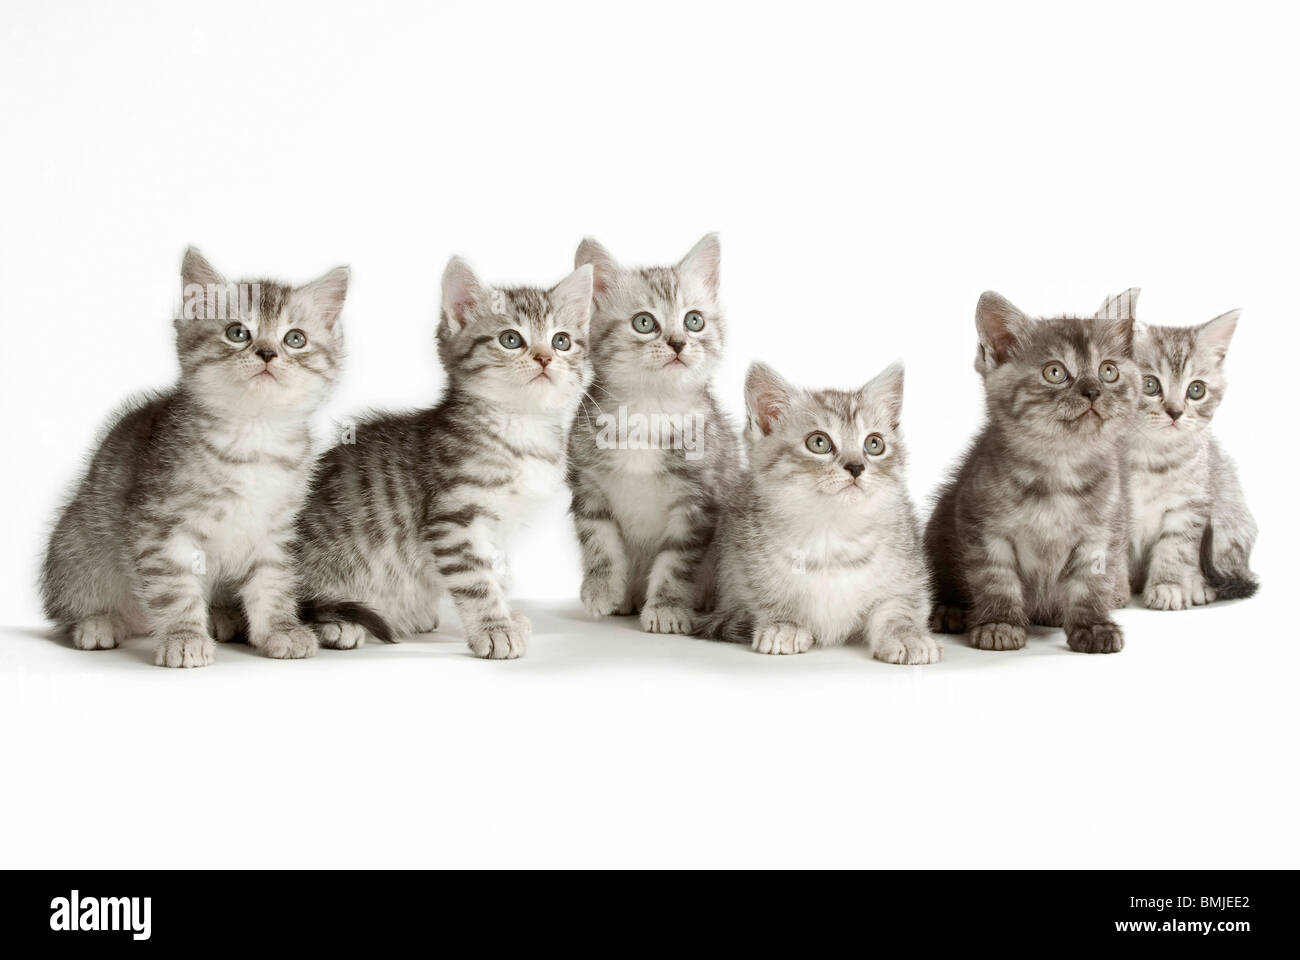 27 Six Cats High Res Illustrations - Getty Images